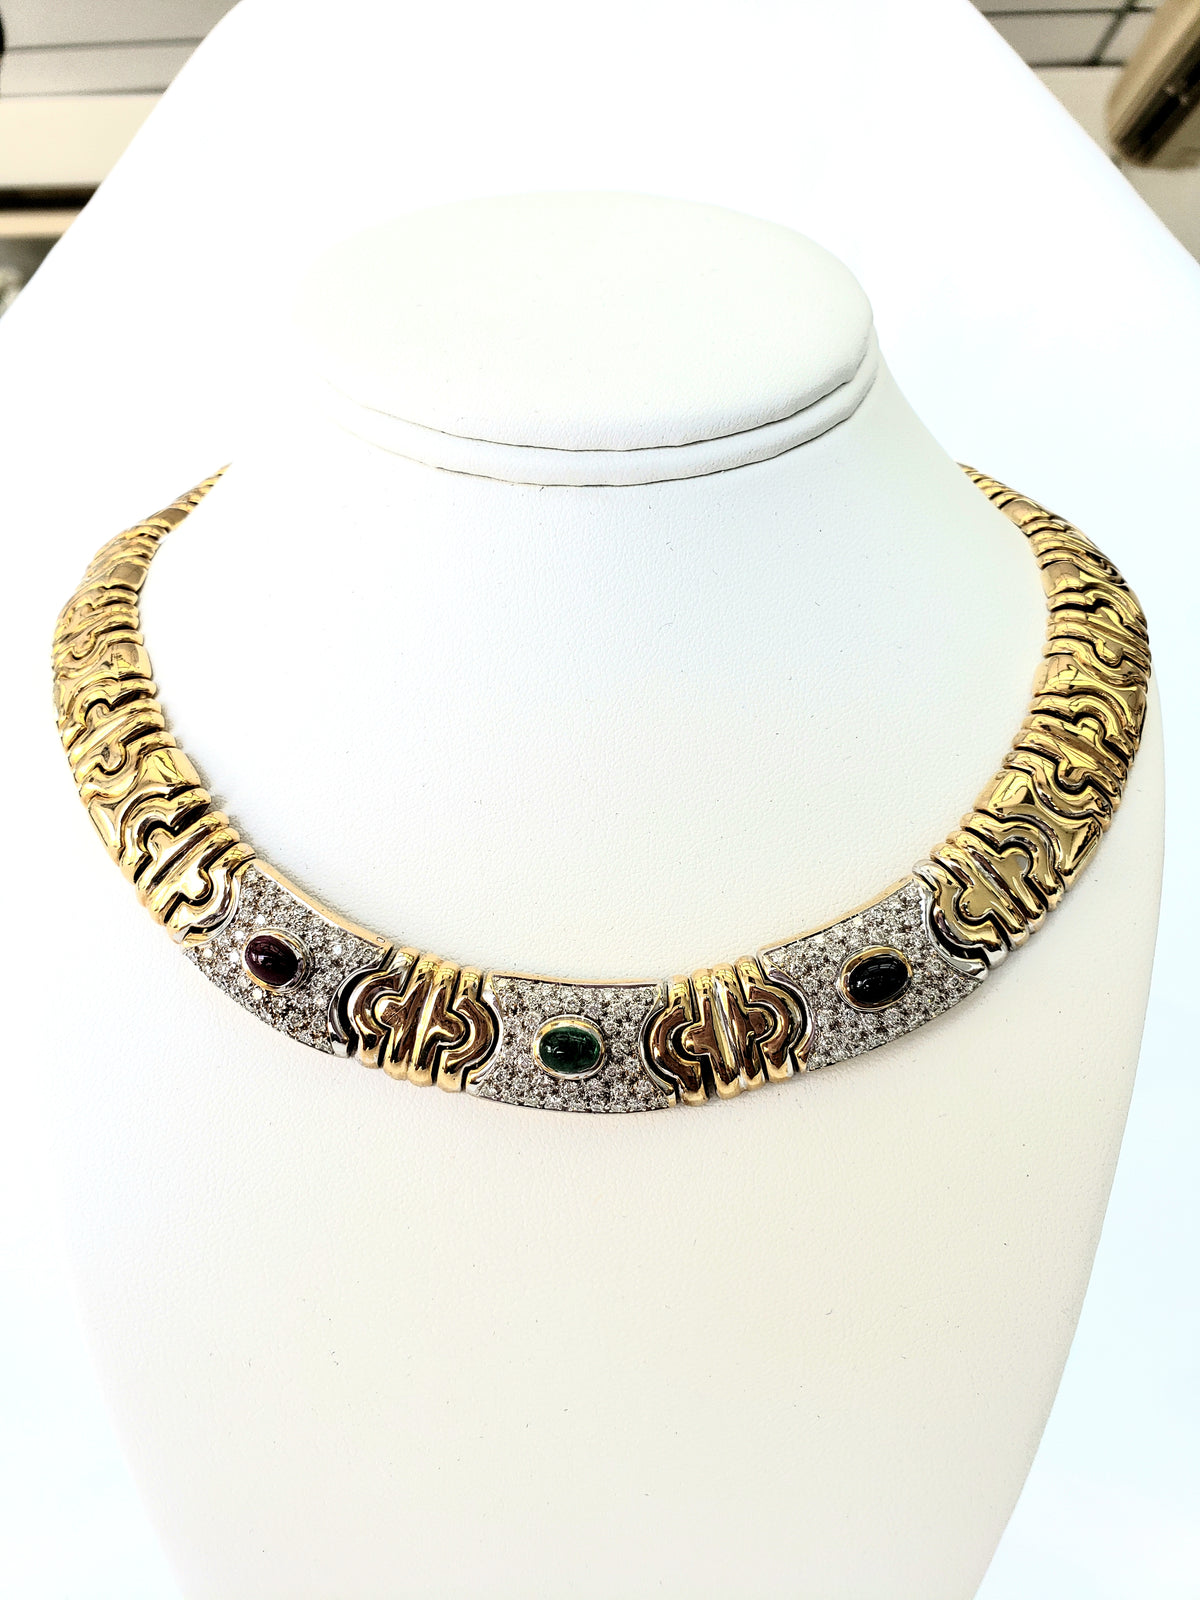 Heavy Italian Necklace with Multi-Colored Stones. Call us for price.